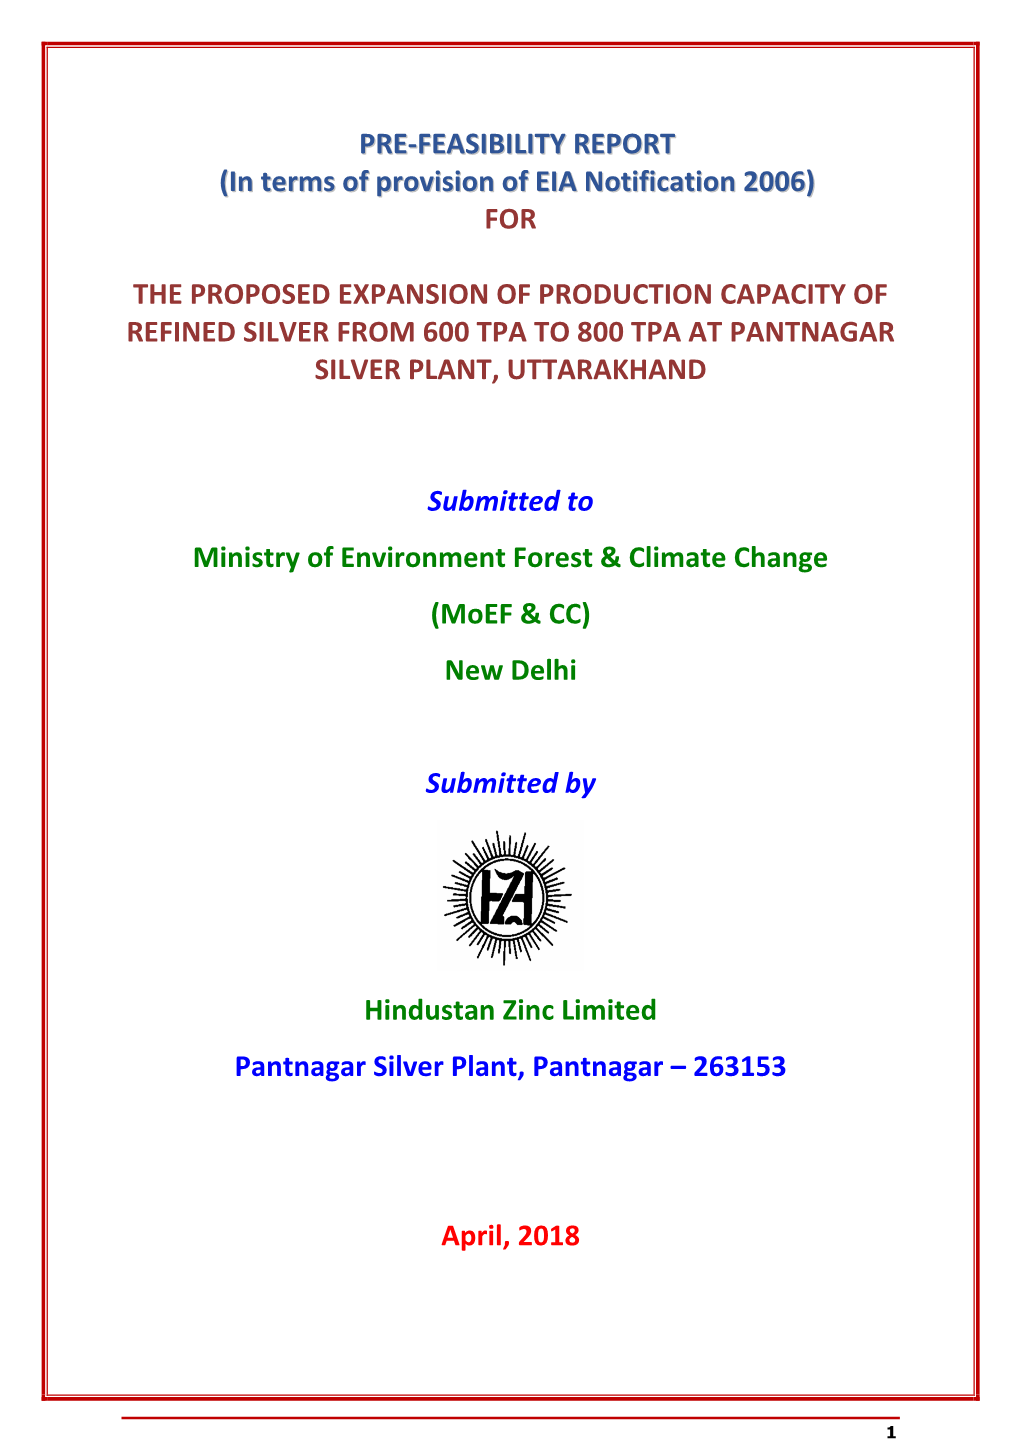 For the Proposed Expansion of Production Capacity of Refined Silver